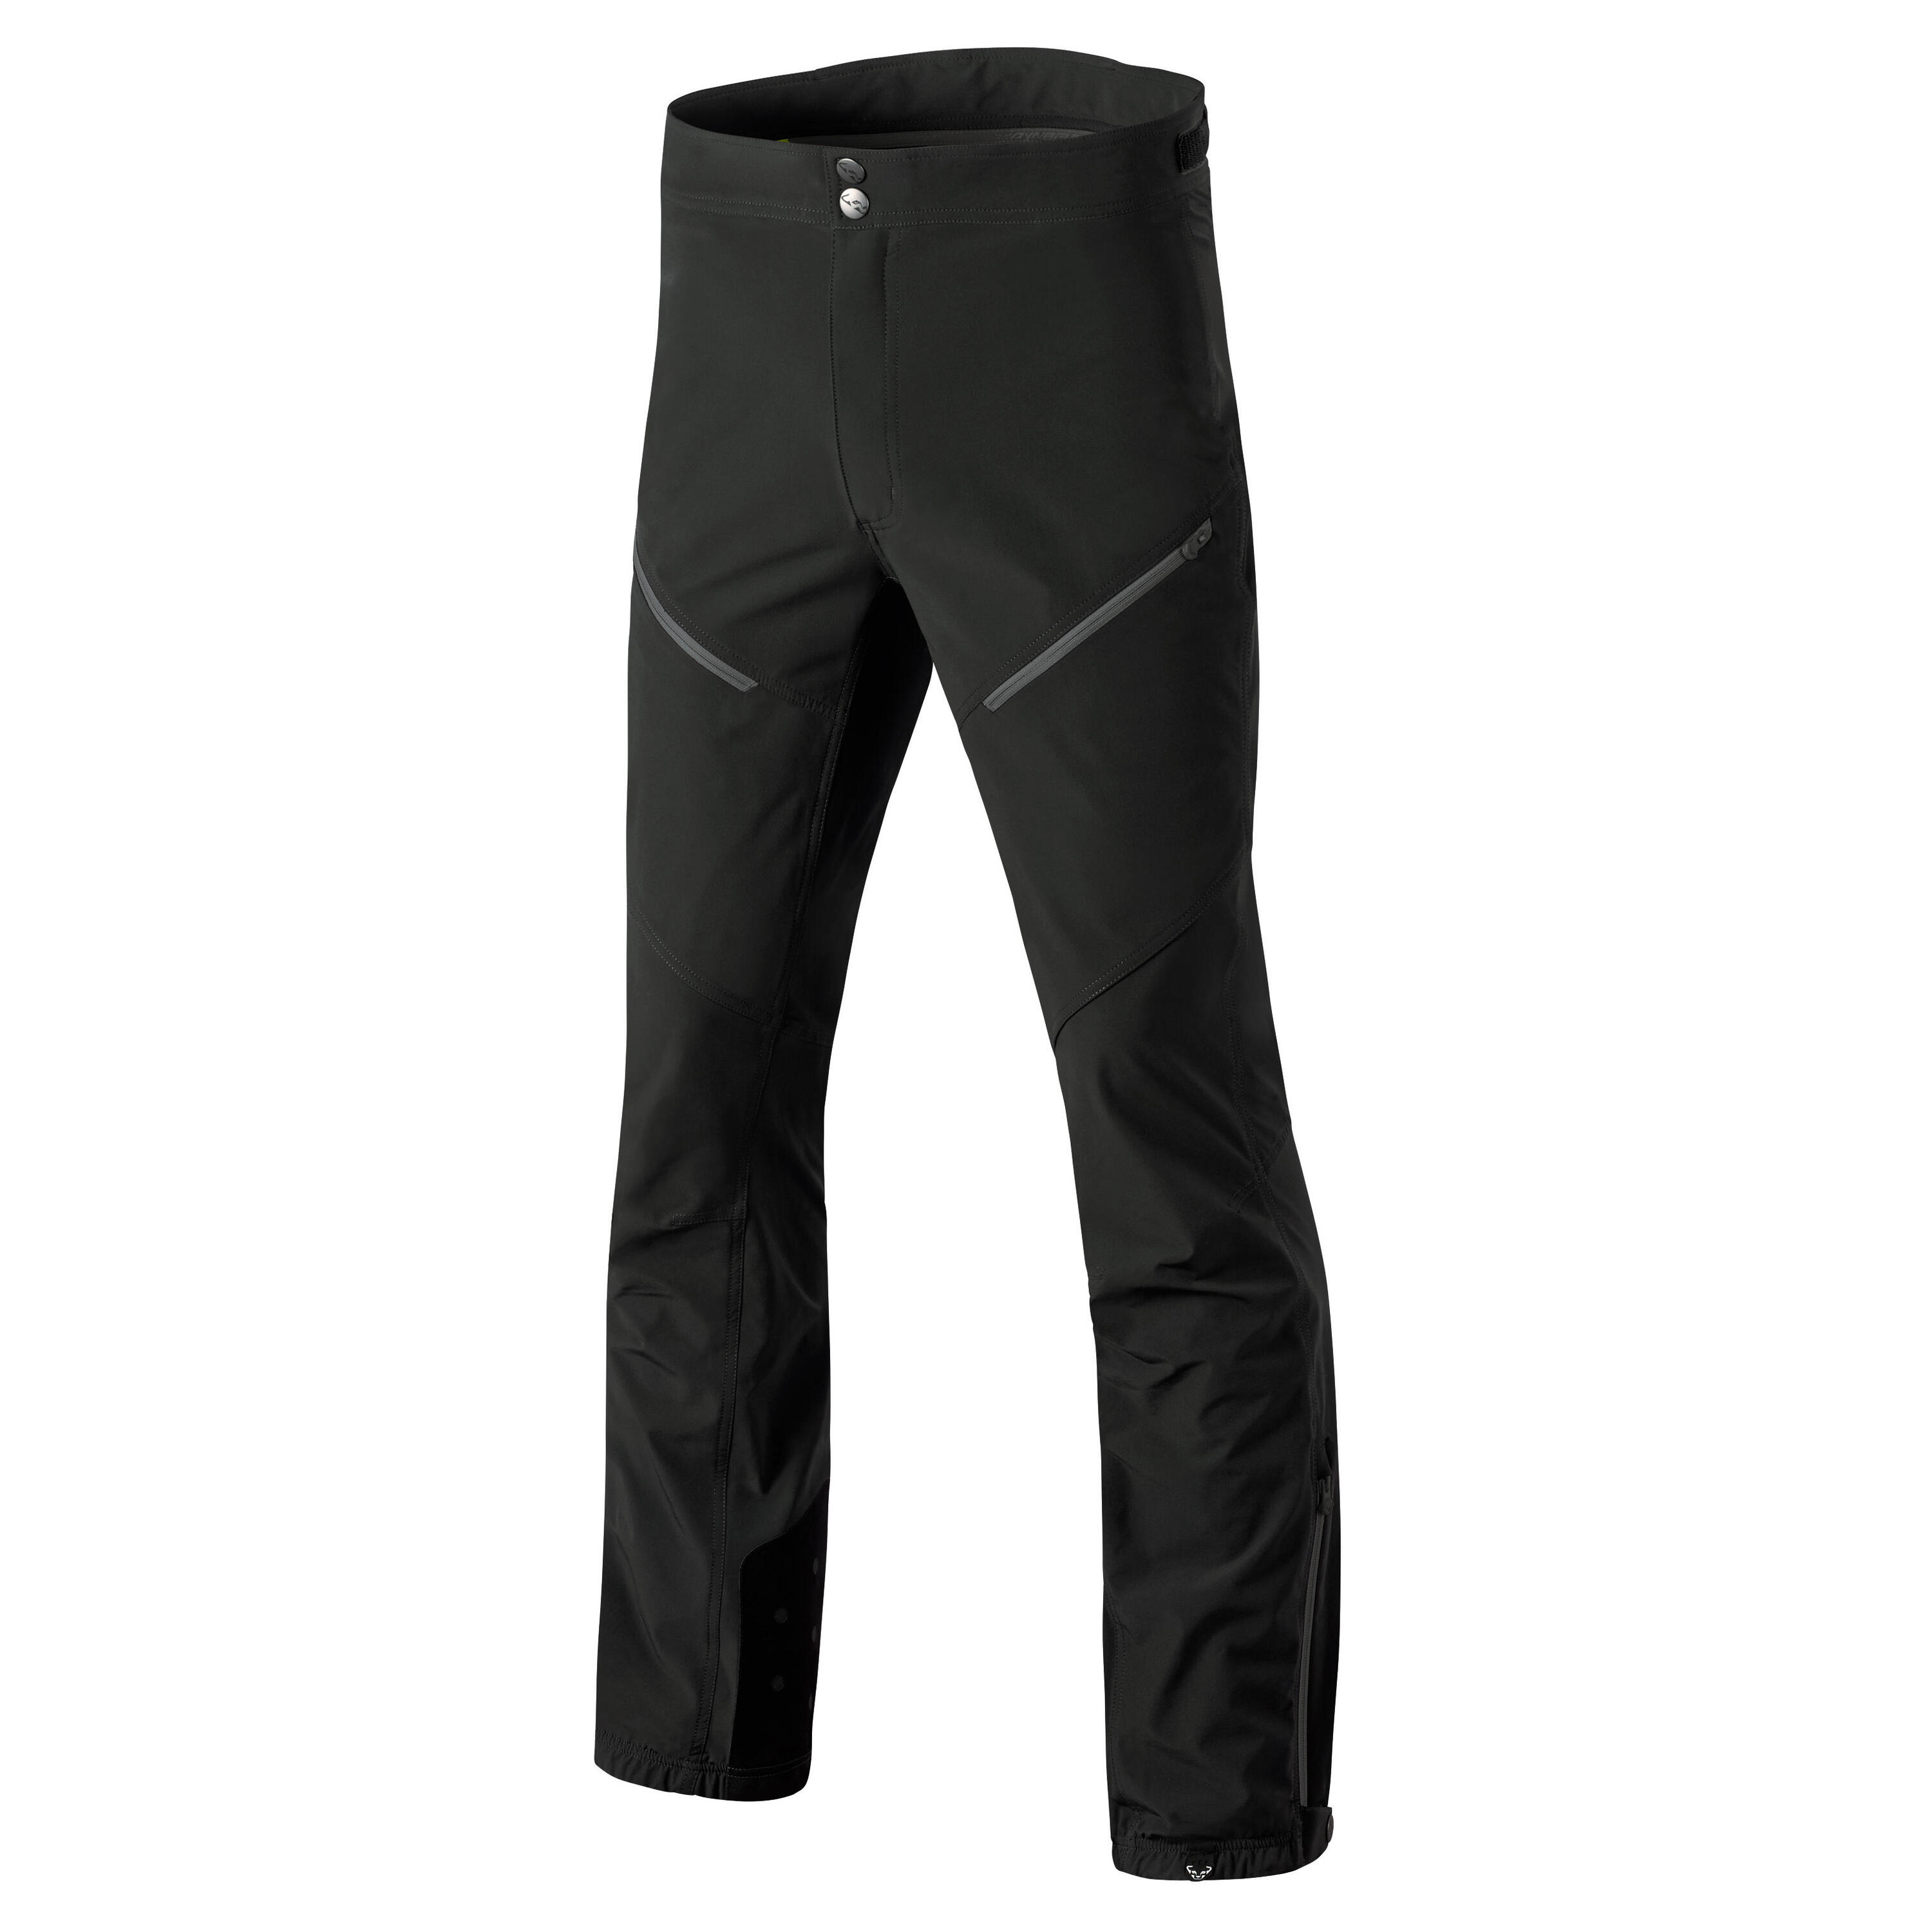 DYNAFIT TLT DST Men's Back-Country Skiing Trousers - Black